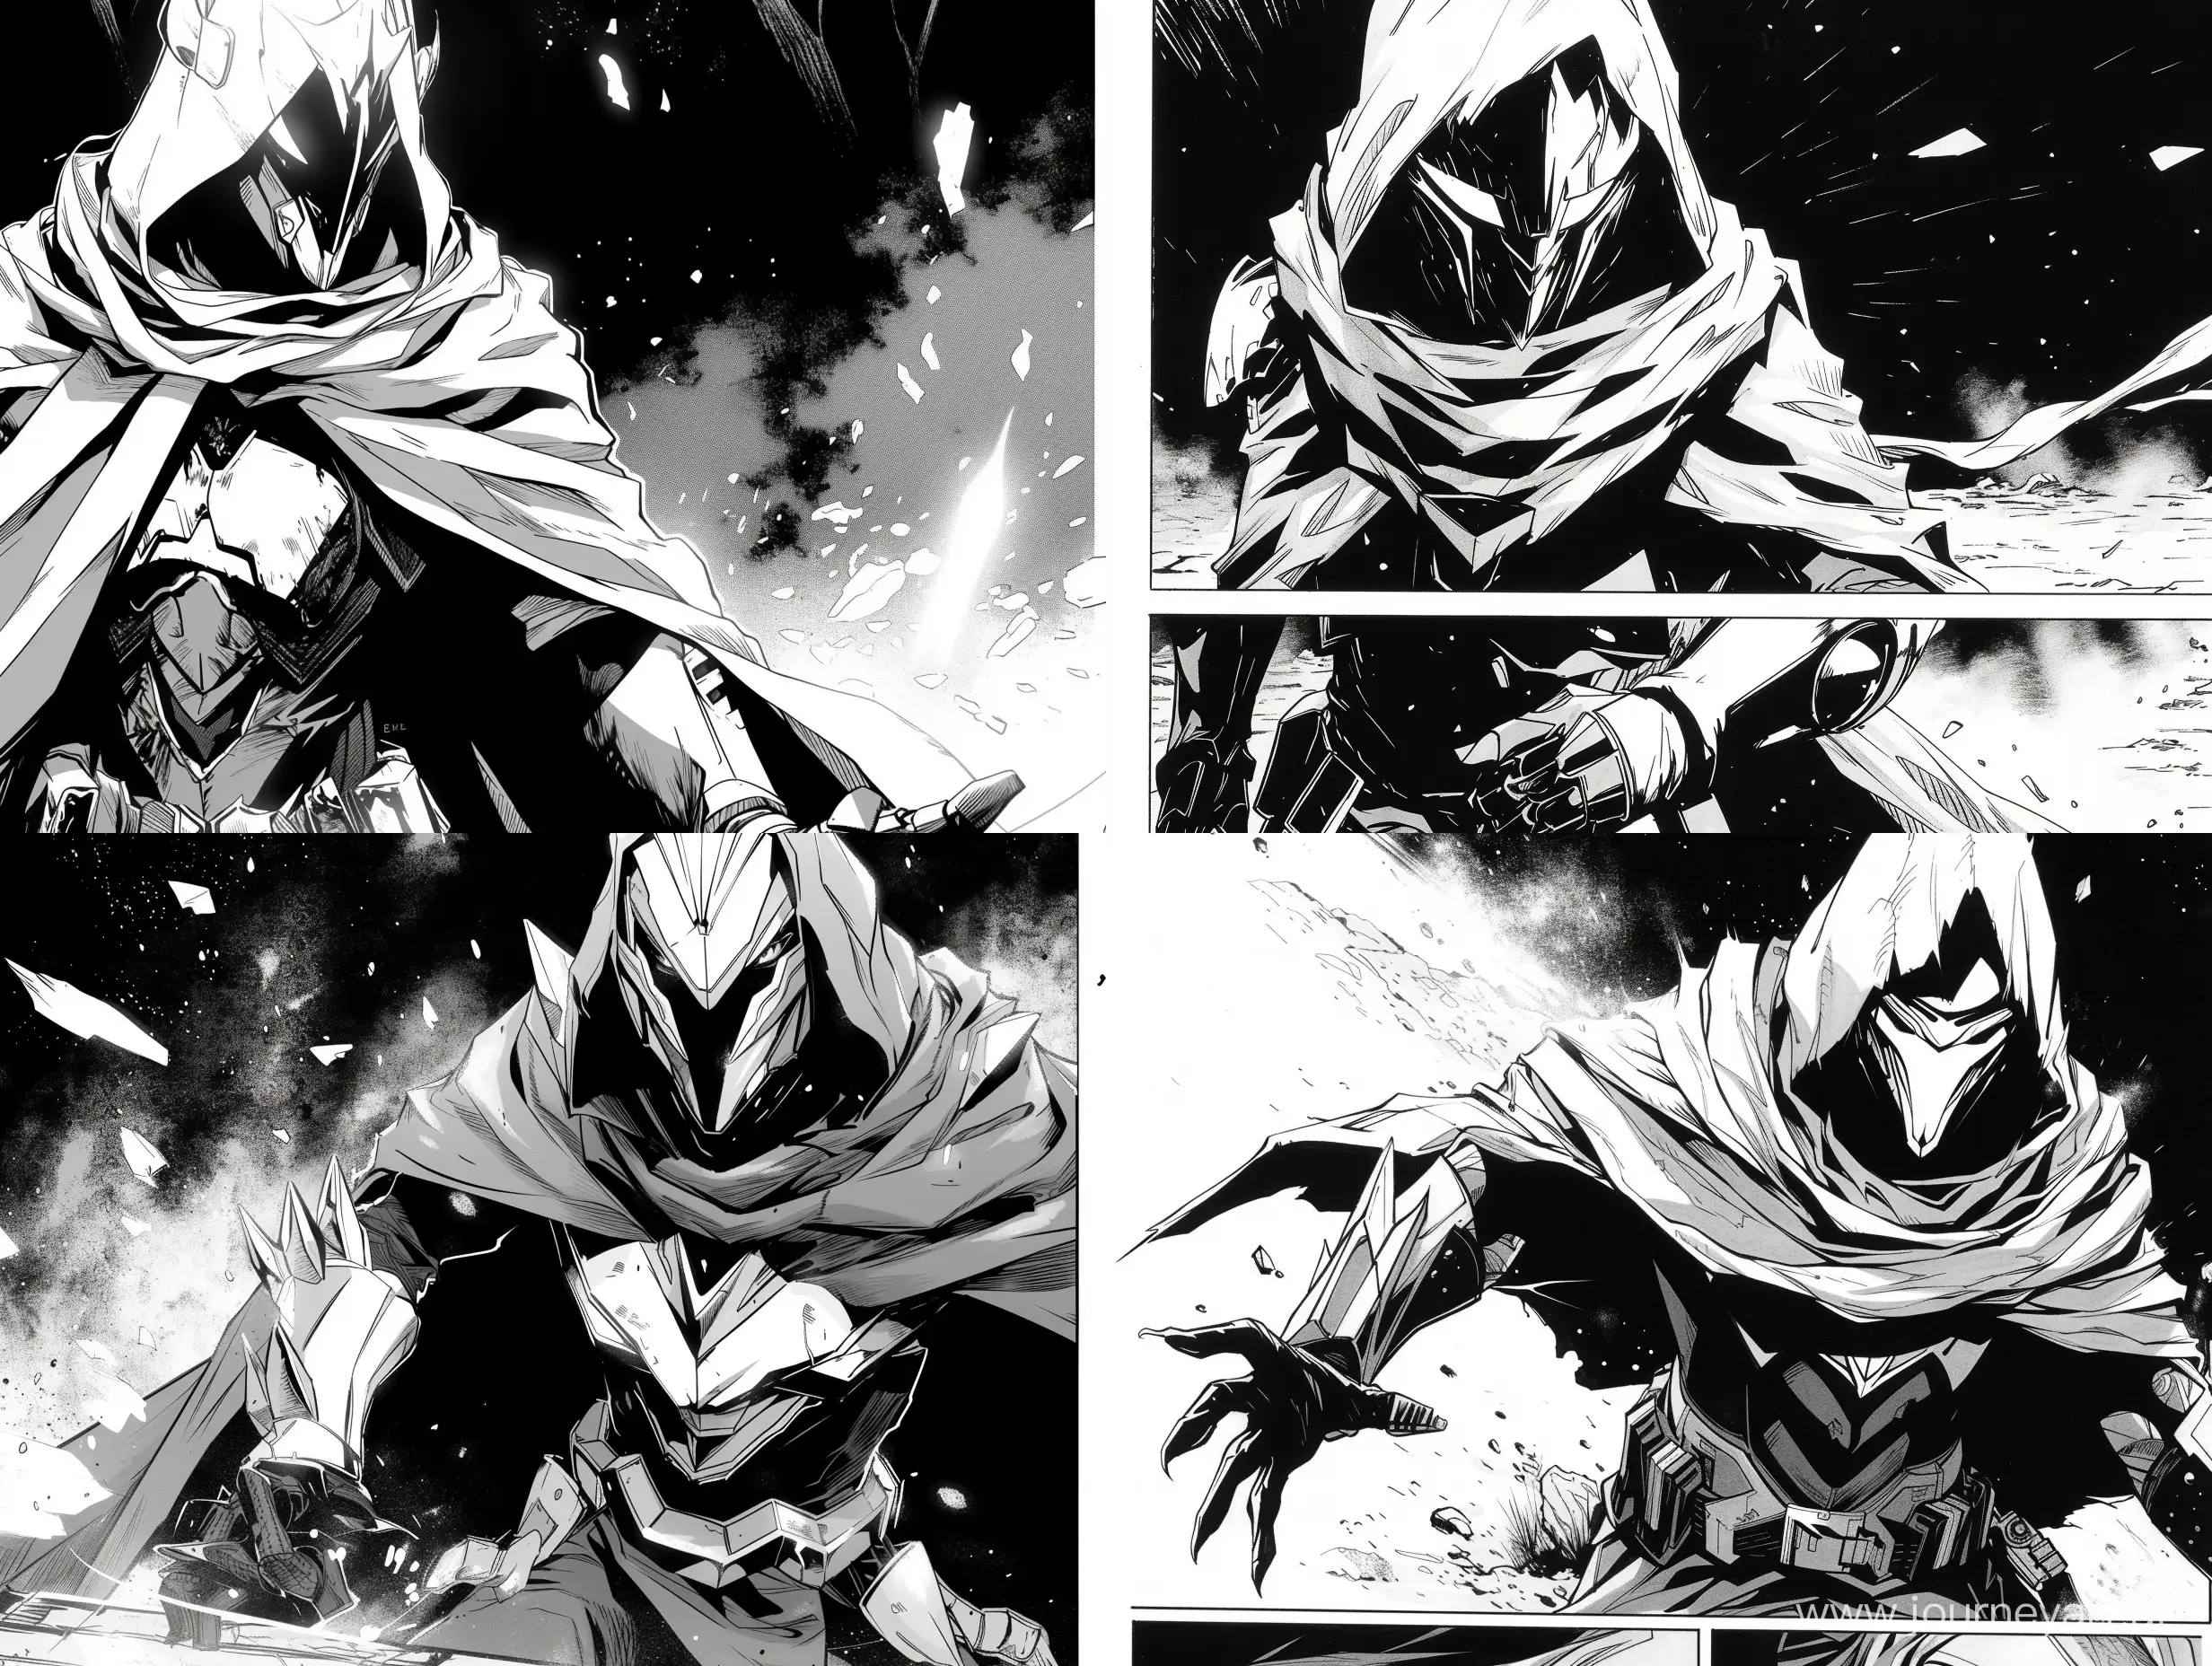 Manga-Style-Dark-Lord-Ranger-in-Wraps-and-Hood-with-Sith-Mask